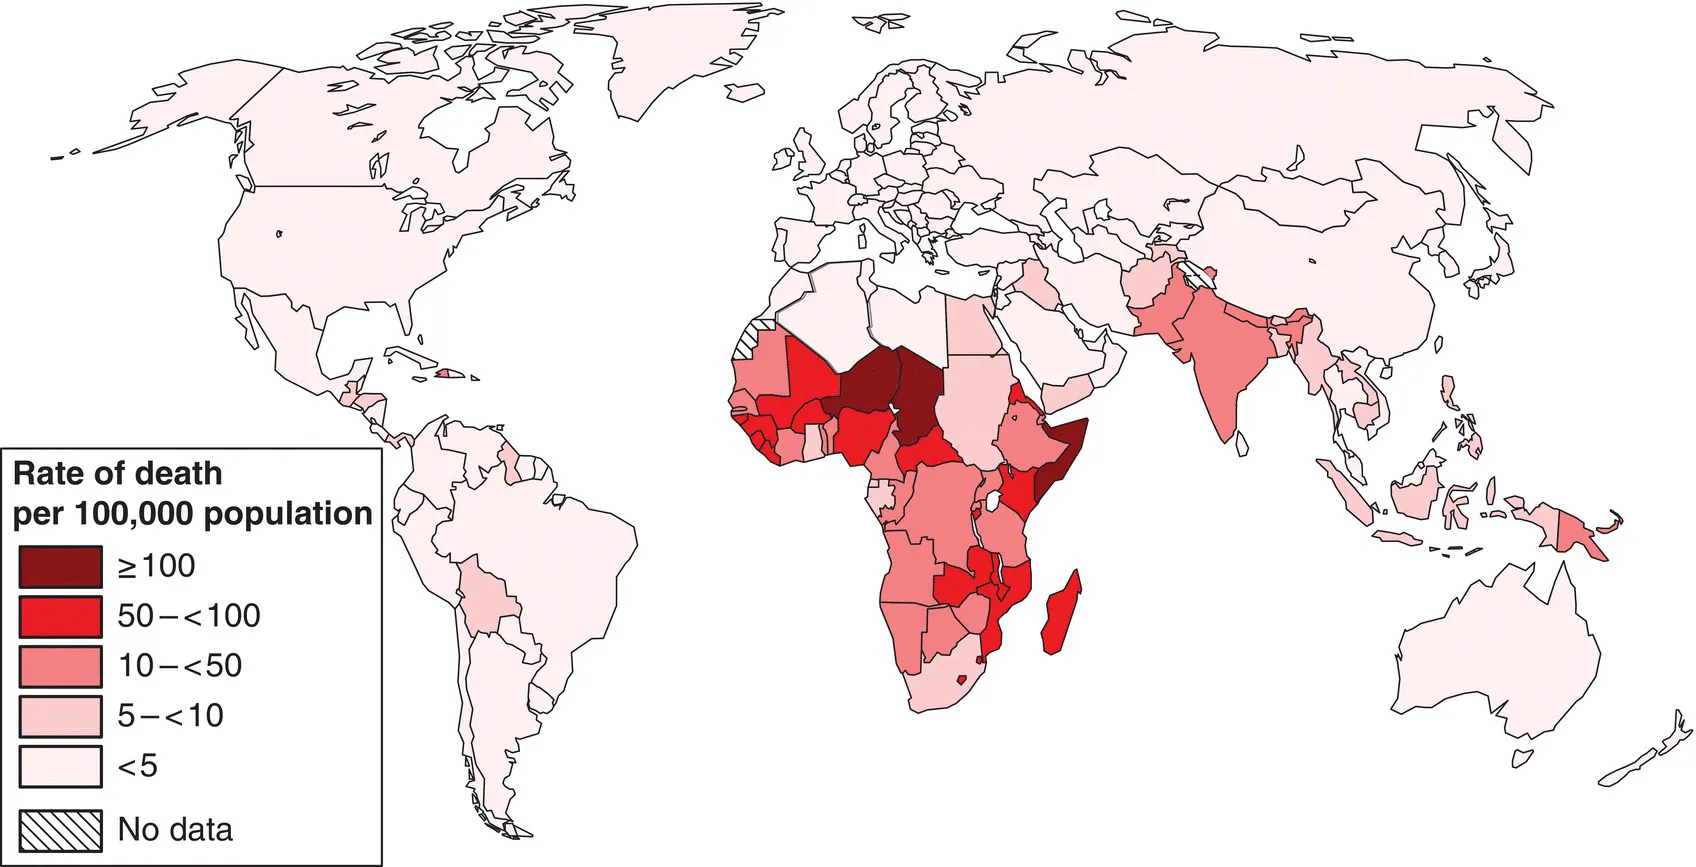 World choropleth map displaying the rate of death due to diarrhea per 100 000 population: ≥100, 50–<100, 10–<50, 5–<10, <5, and no data (hatched pattern).